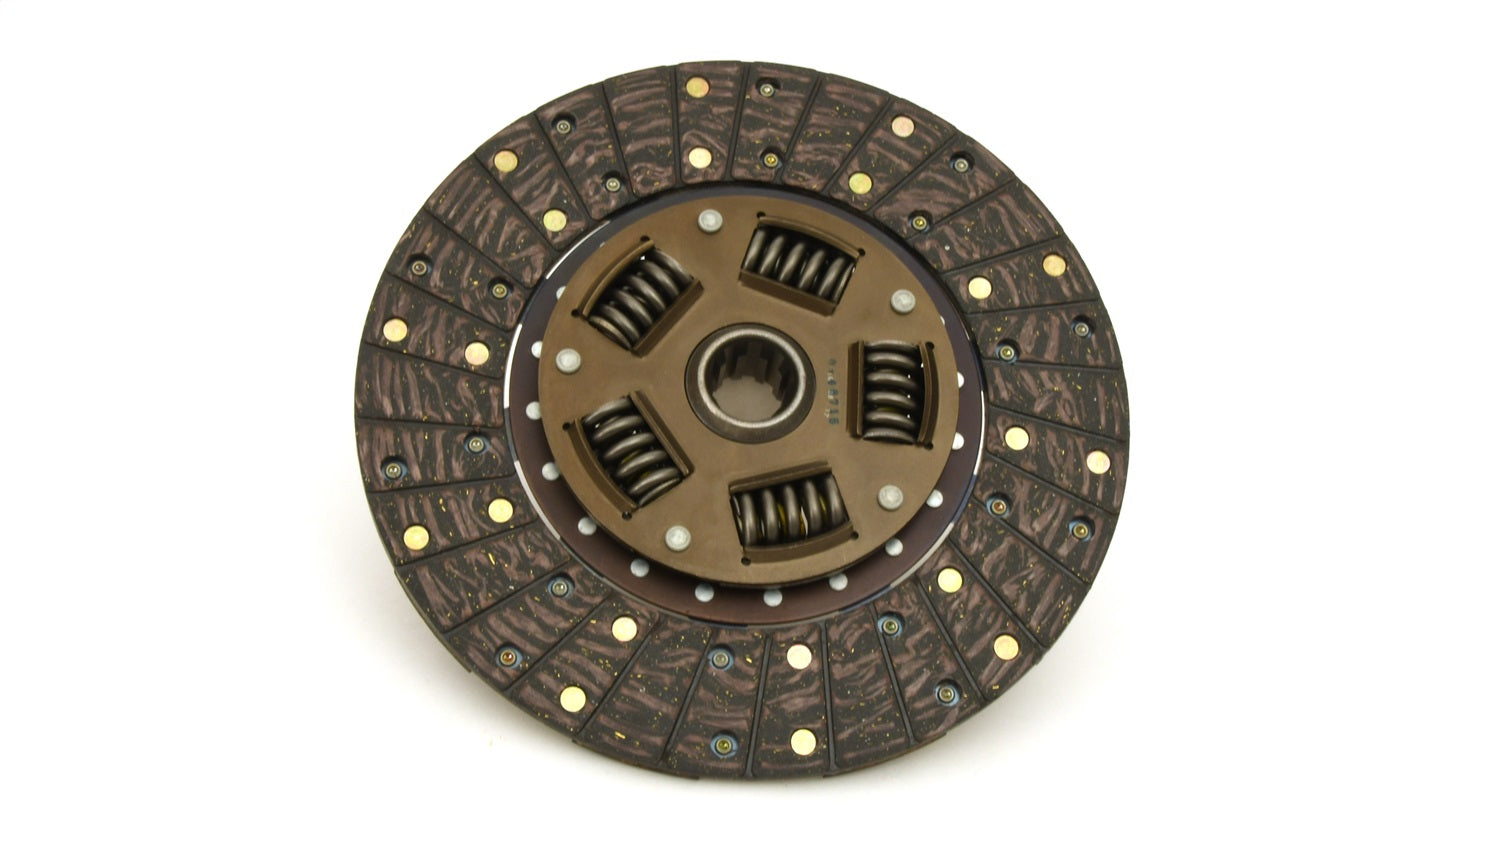 Centerforce DF193890 Dual Friction Clutch Pressure Plate And Disc Set